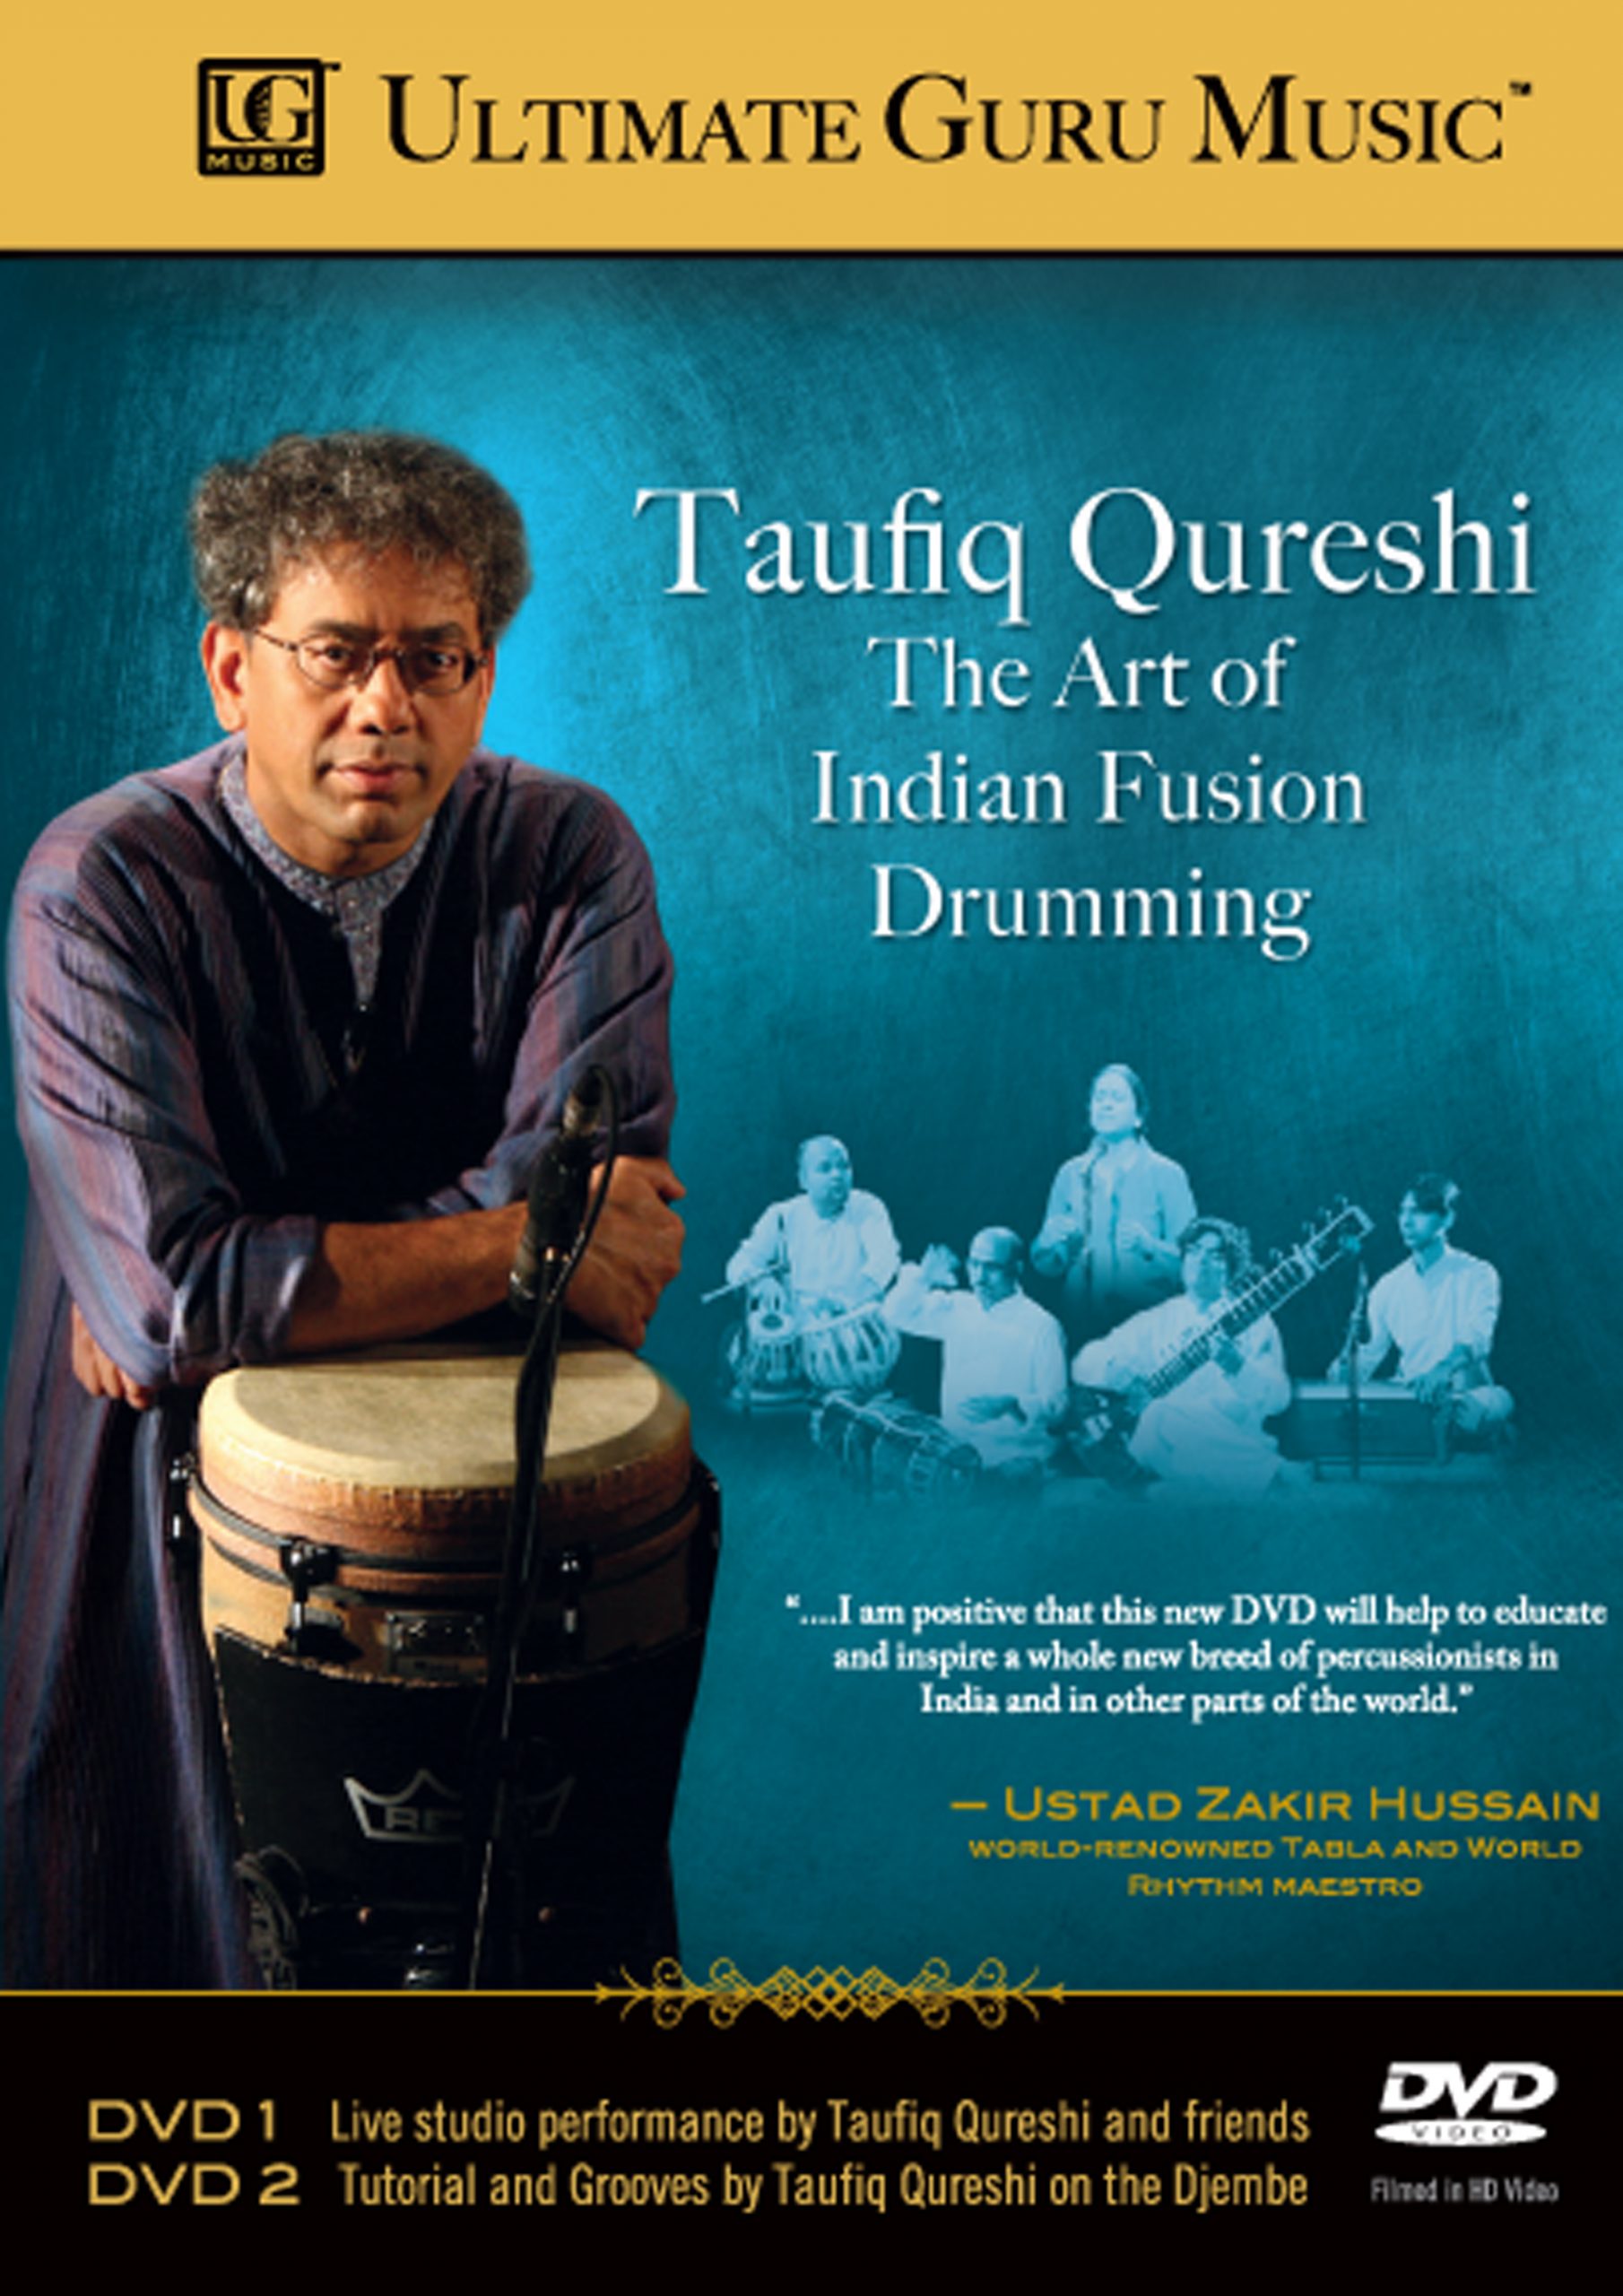 DVD review: Ultimate Guru Music presents,  “The Art of Fusion Drumming” by Taufiq Qureshi